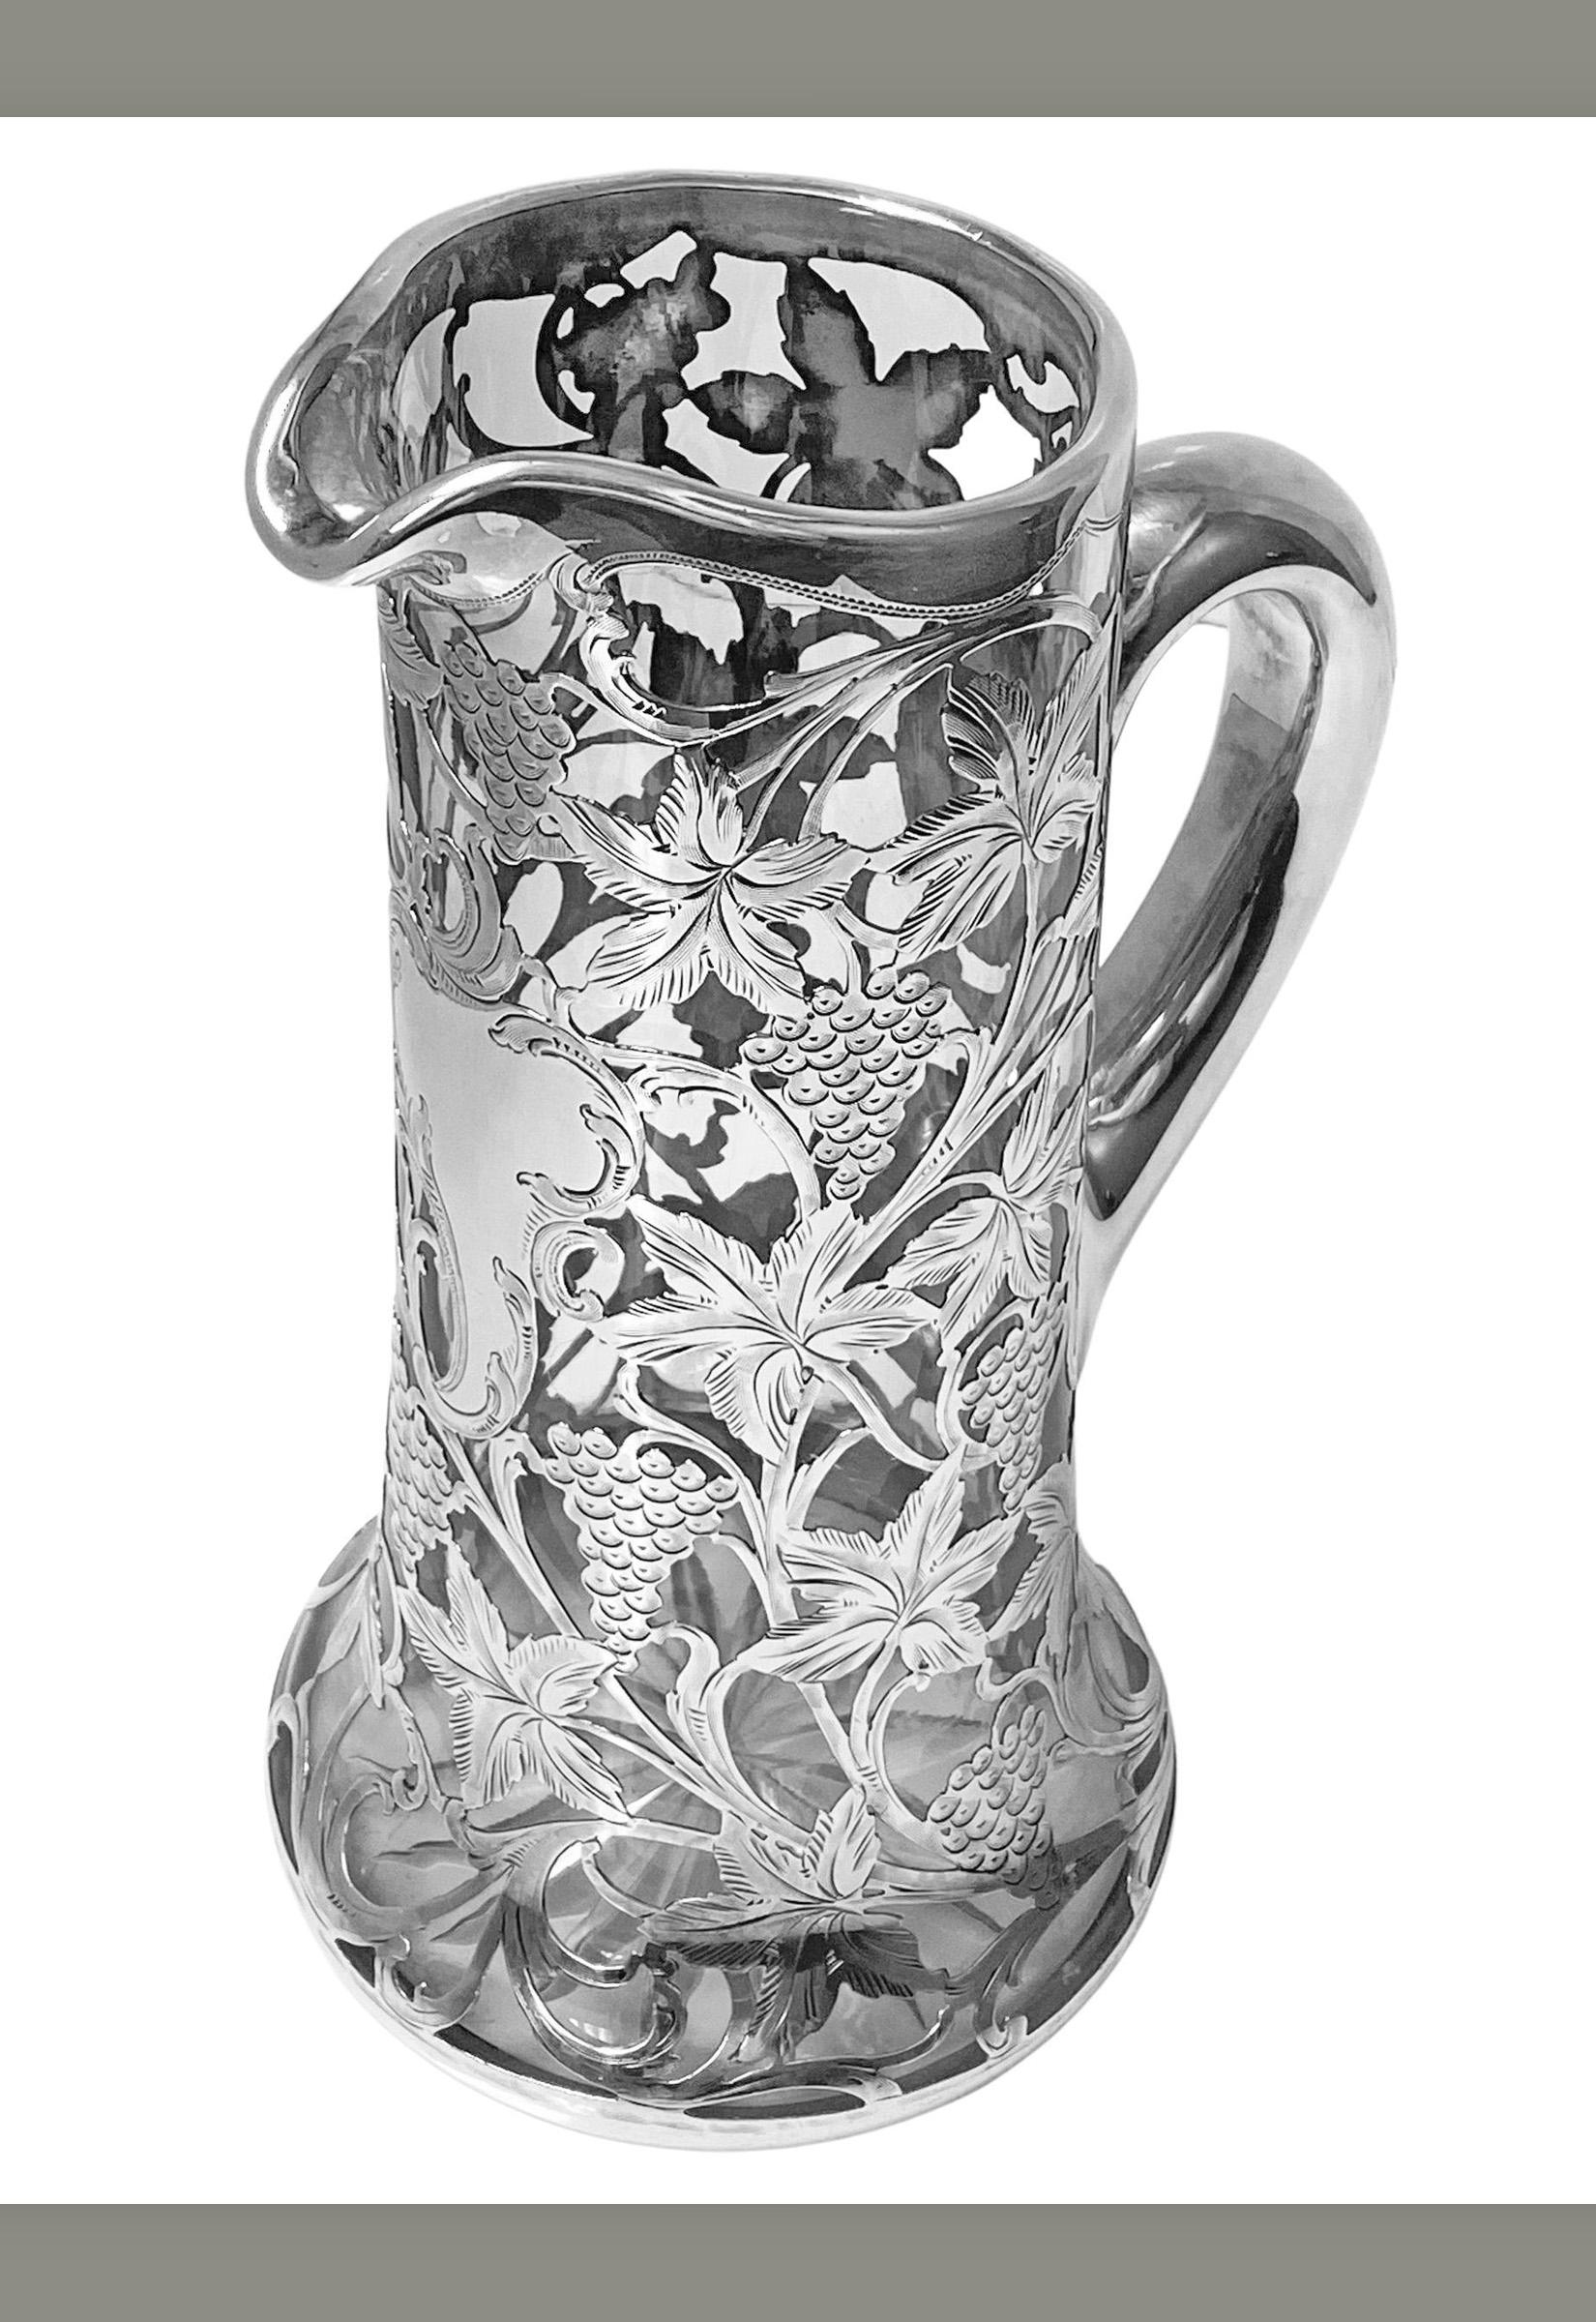 American Alvin Sterling Overlay Glass Jug Pitcher, c. 1900.